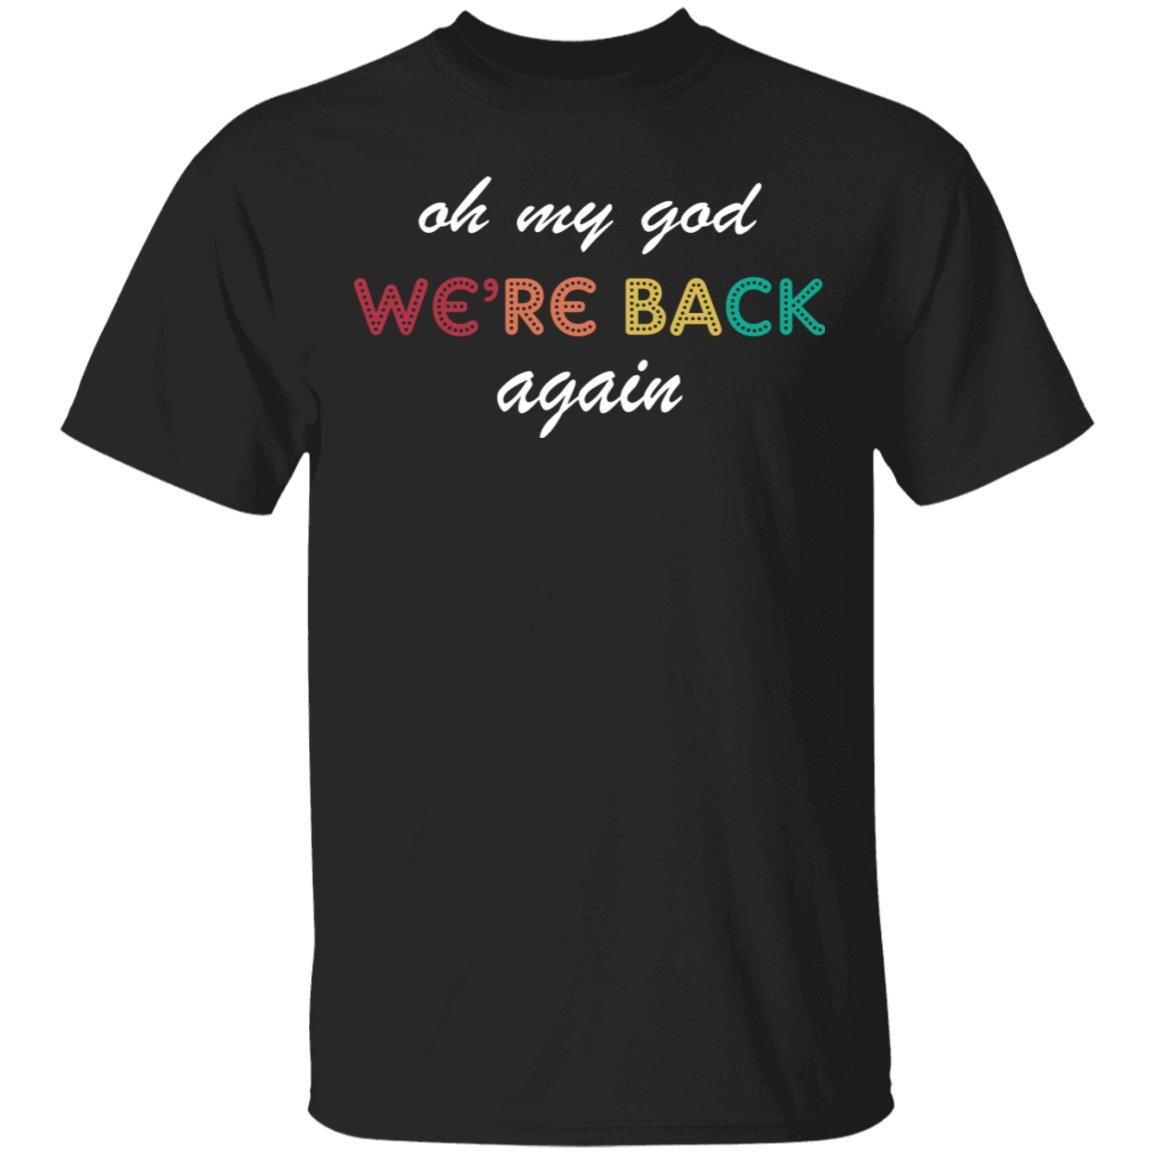 Oh My God We're Back Again Vintage T-Shirt Funny Apparel For Friend ...